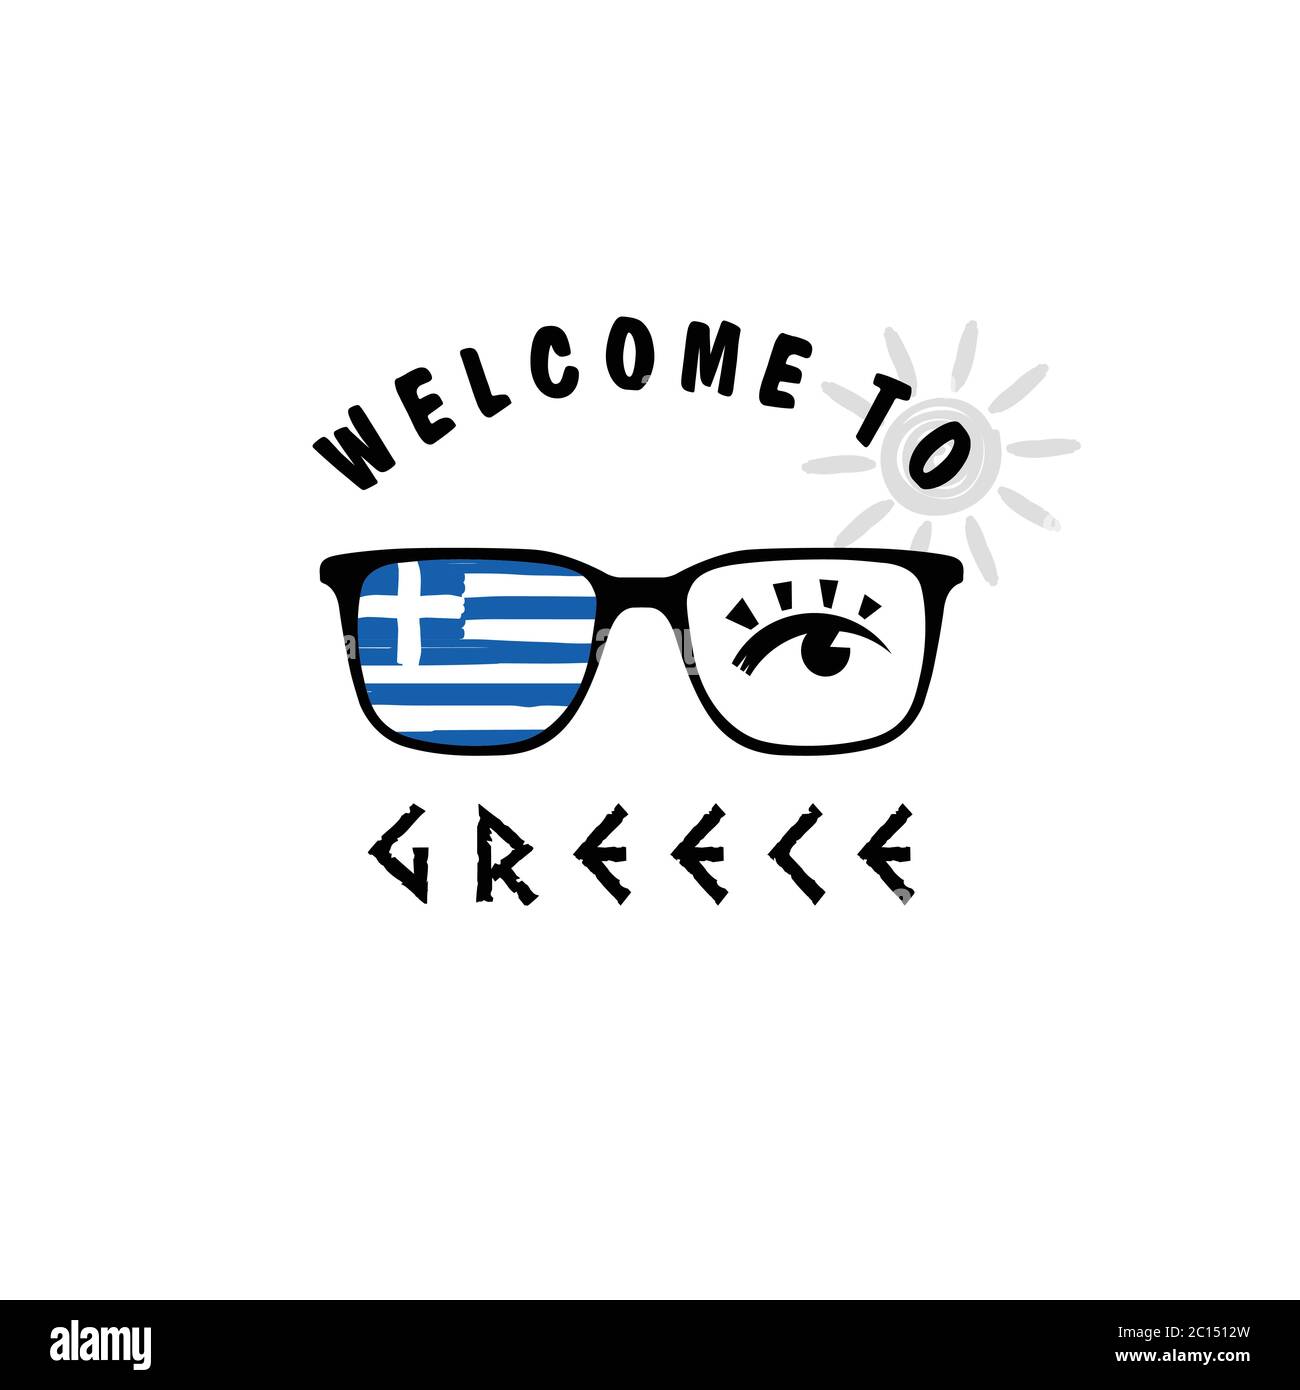 welcome to greece icon paradise on sunglasses art illustration Stock Vector